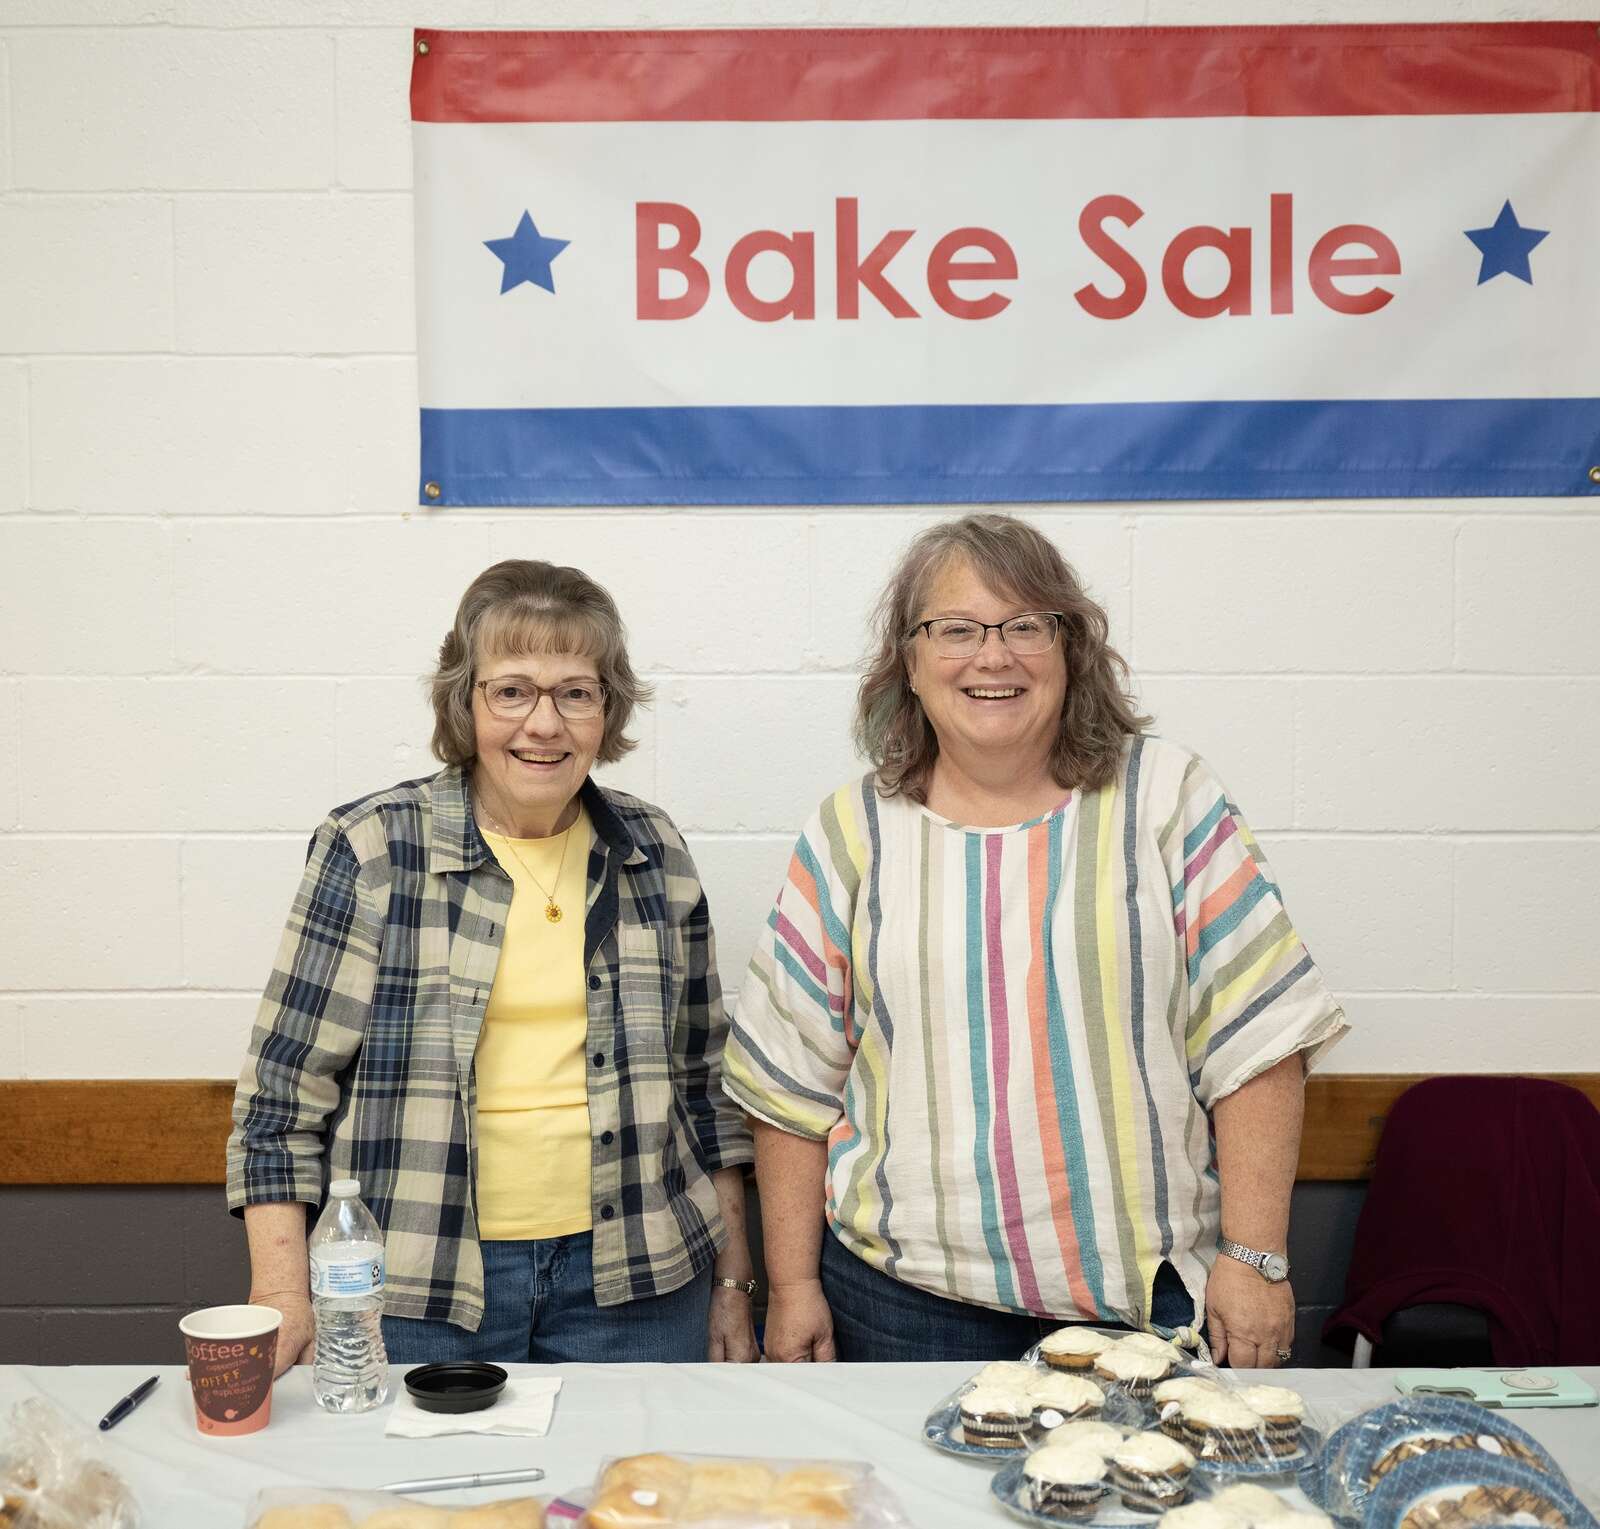 Karen Grosclaude and Marci Shay tend the baking table